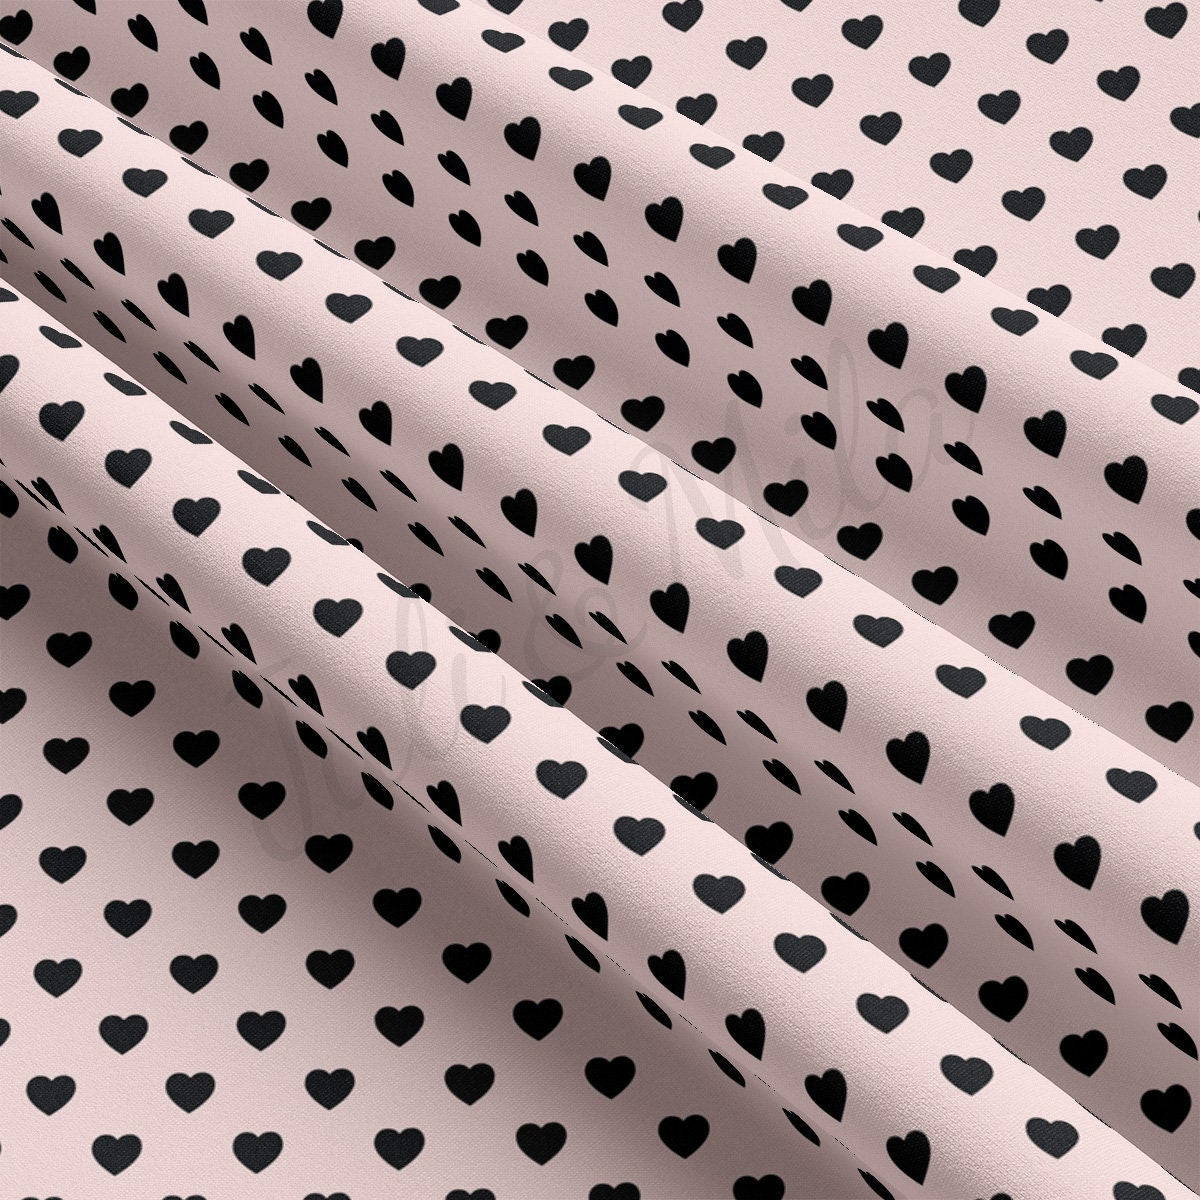 DBP Fabric Double Brushed Polyester Fabric DBP2445